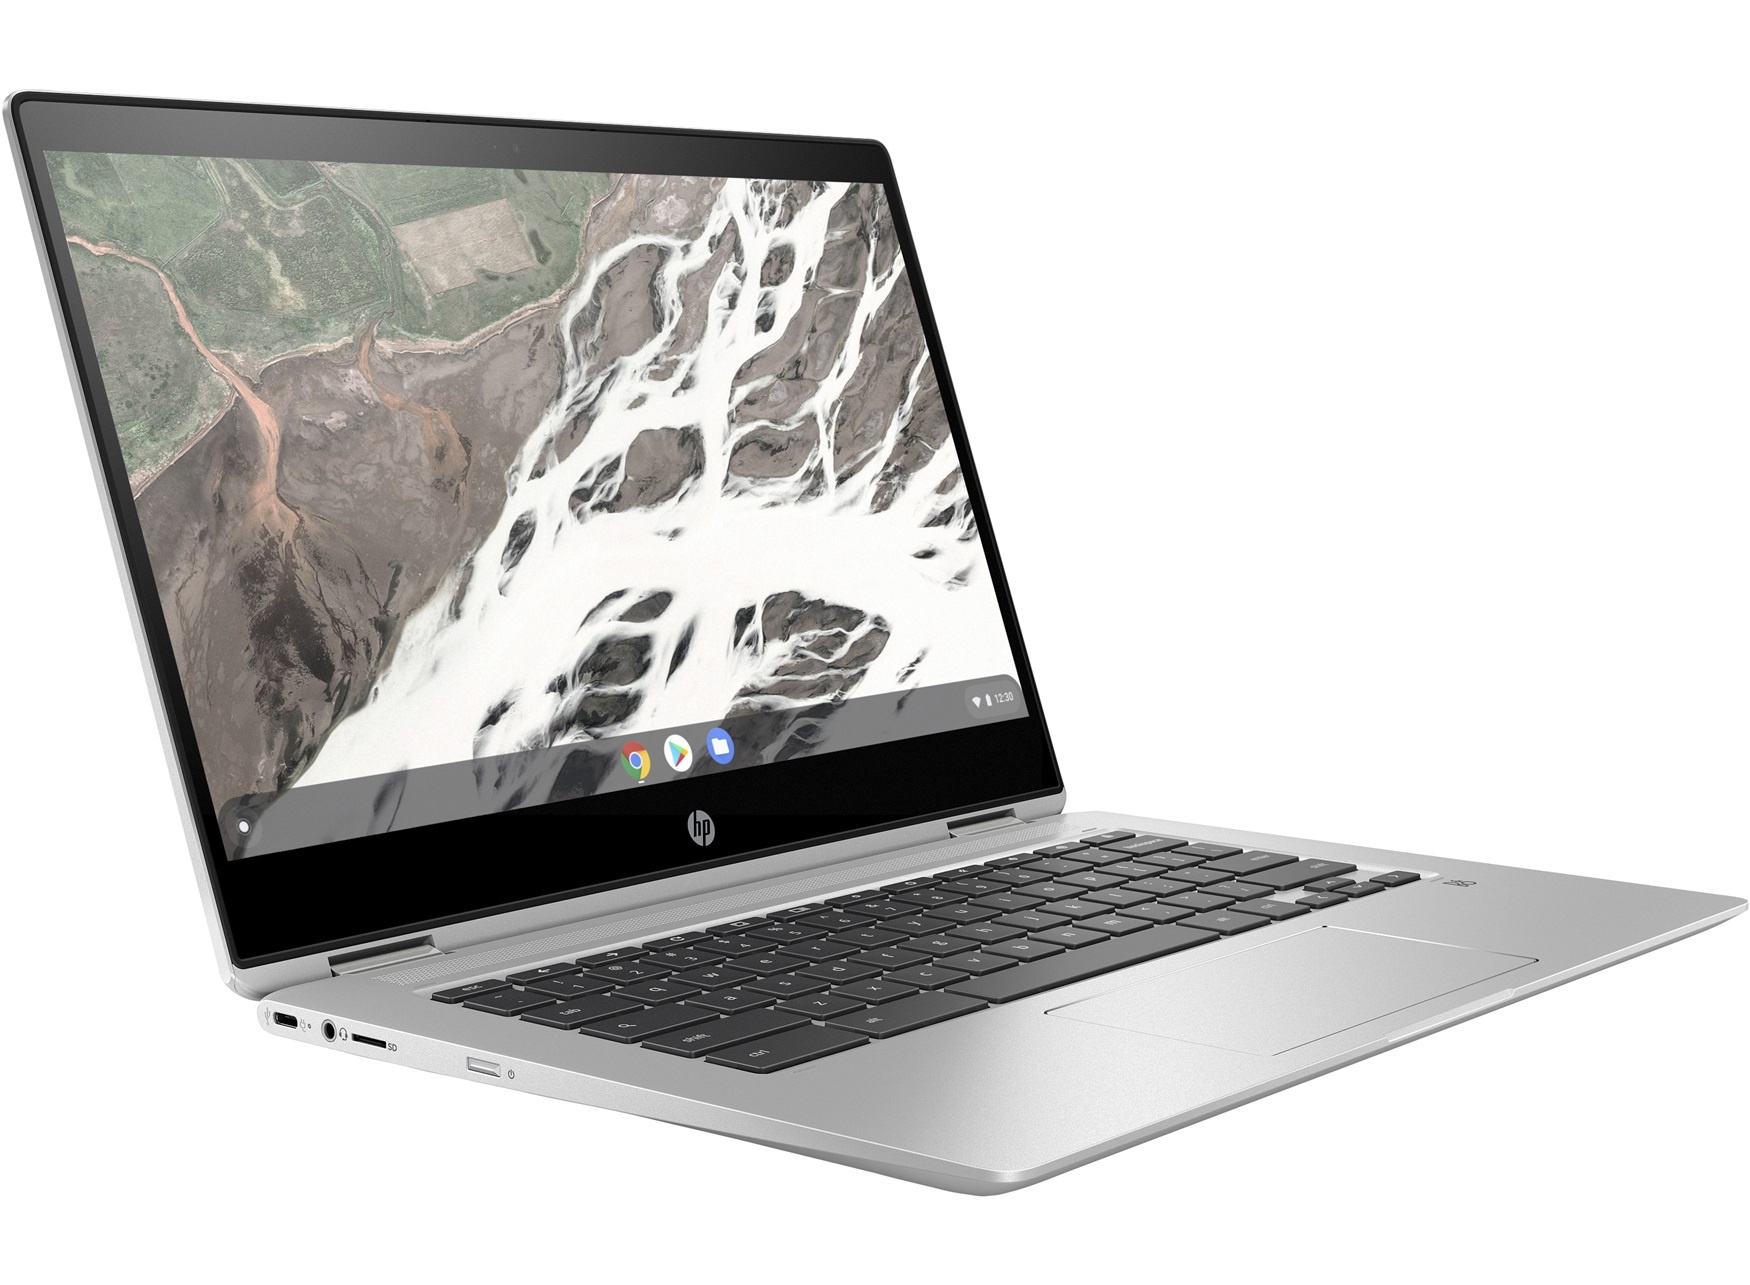 HP Chromebook X360 14 price cut 200, snag this Core i3 2in1 for 399